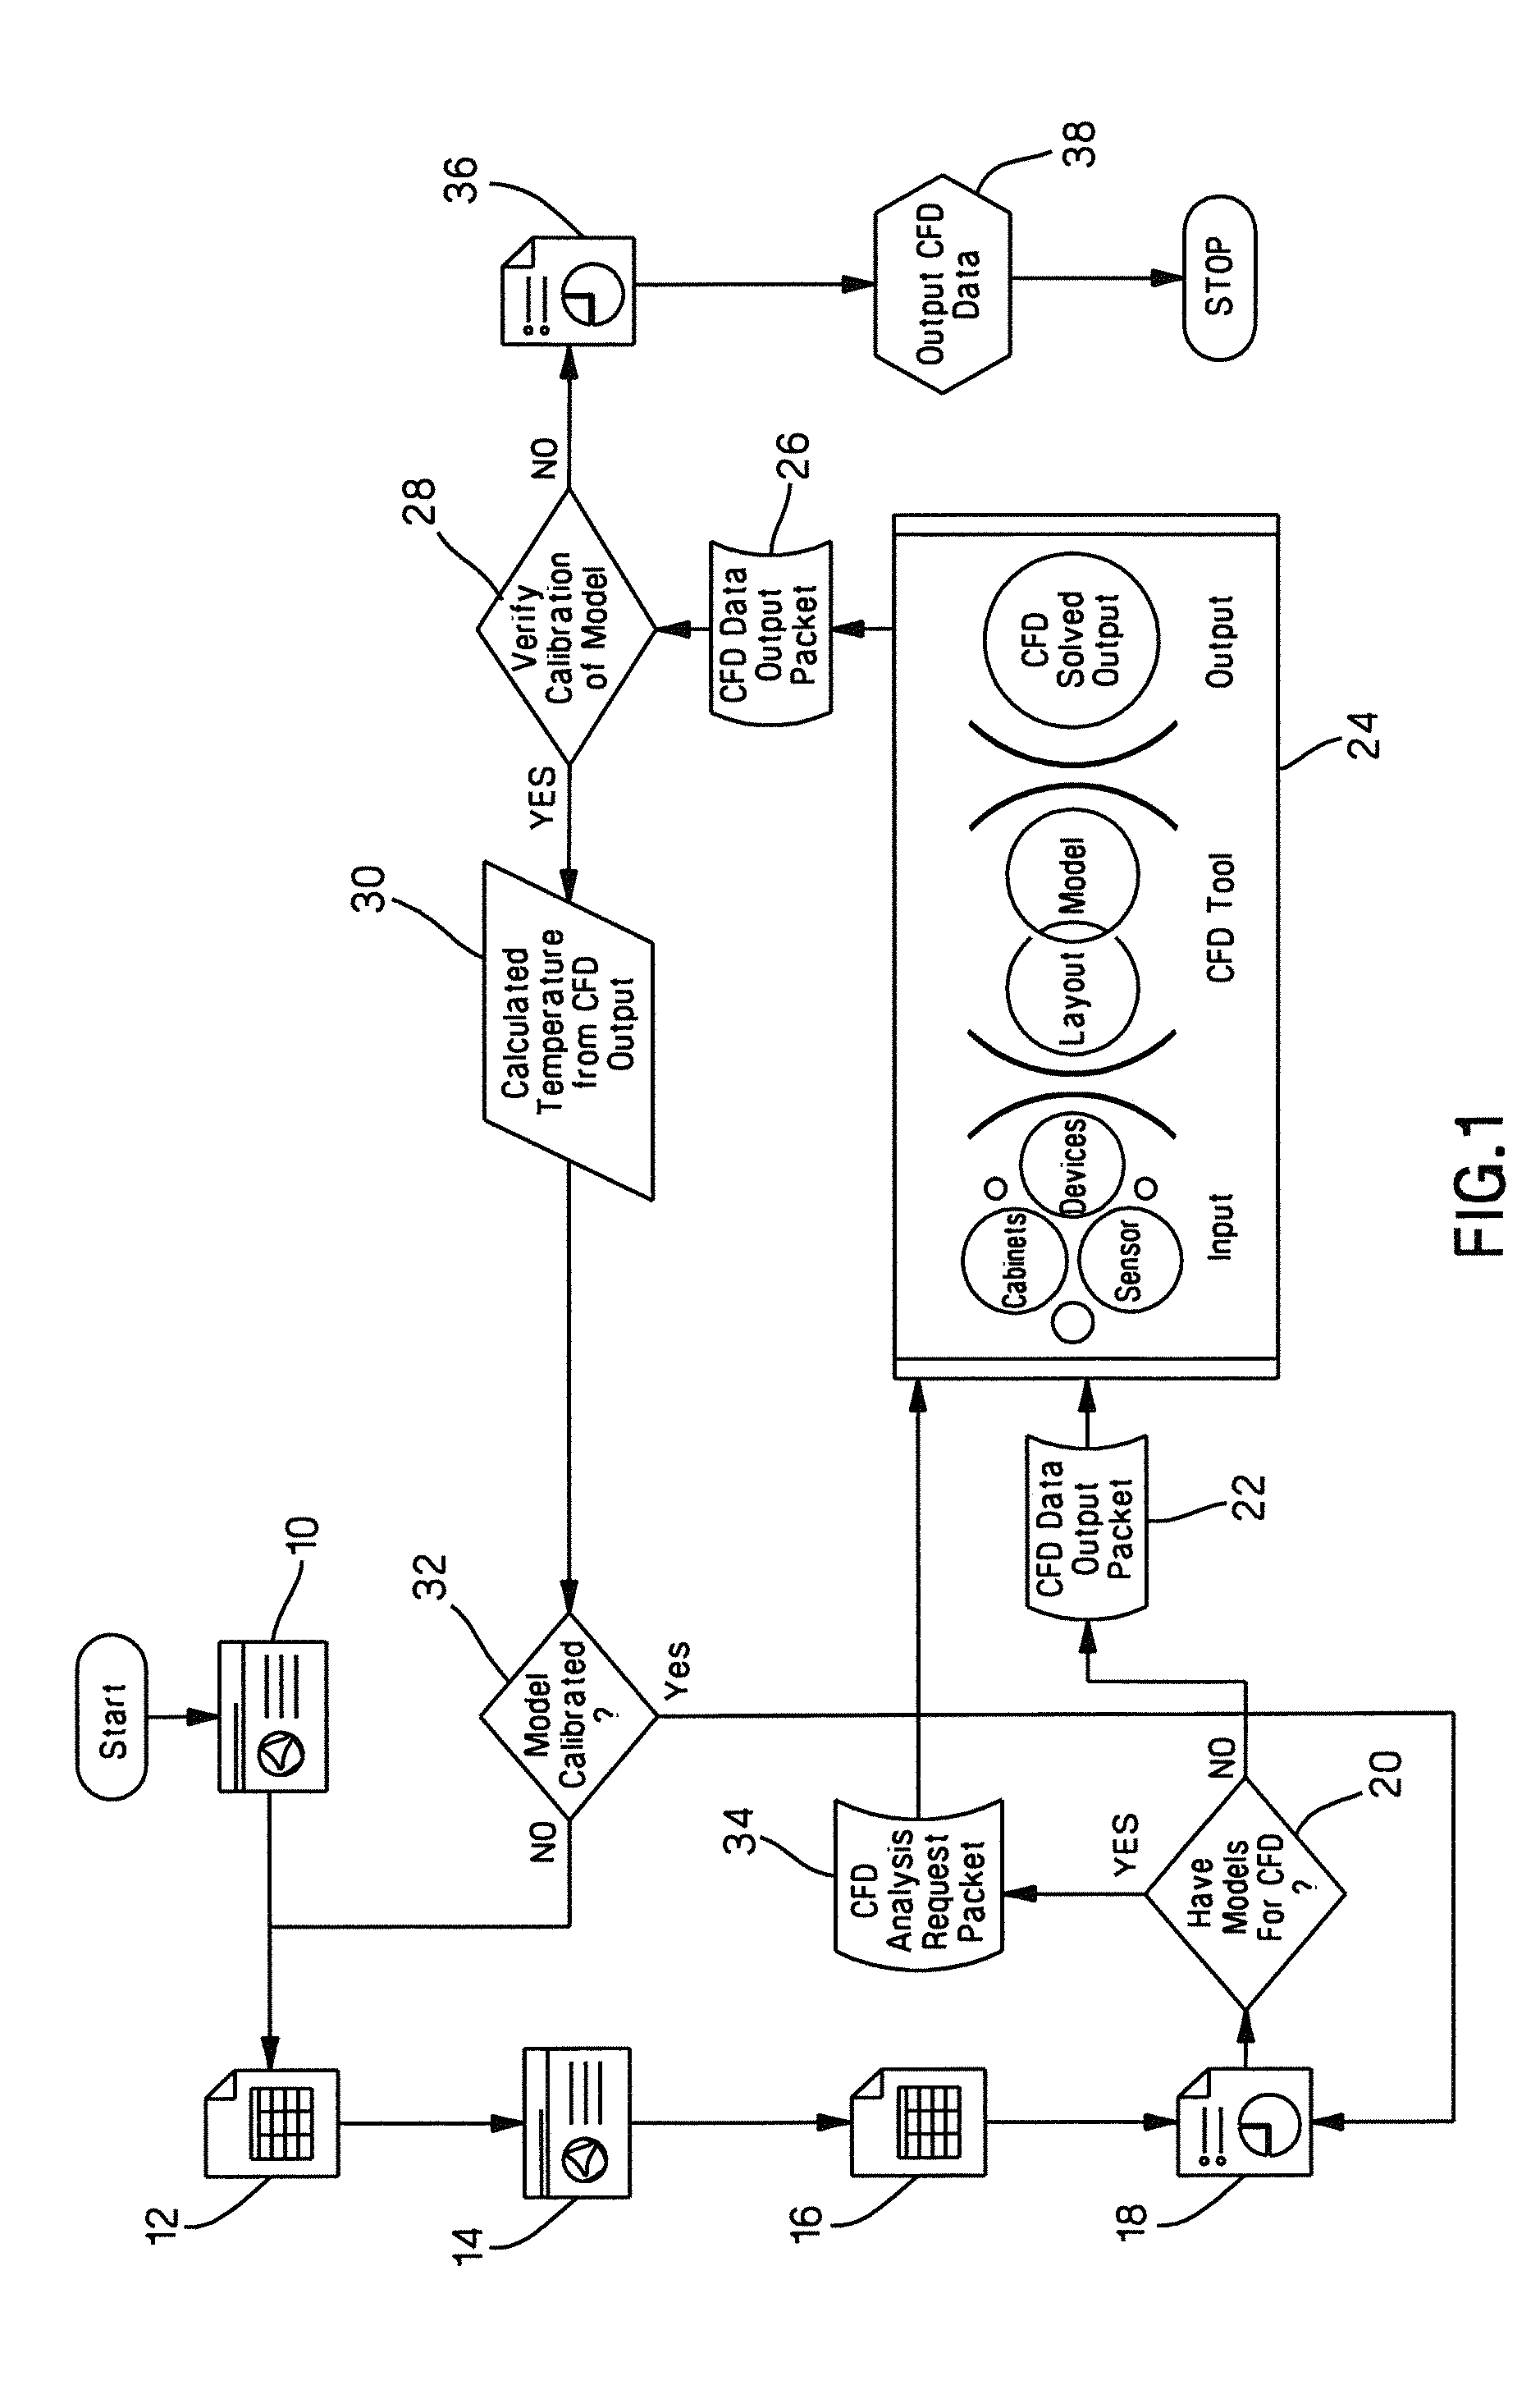 Computational Fluid Dynamics Systems and Methods of Use Thereof